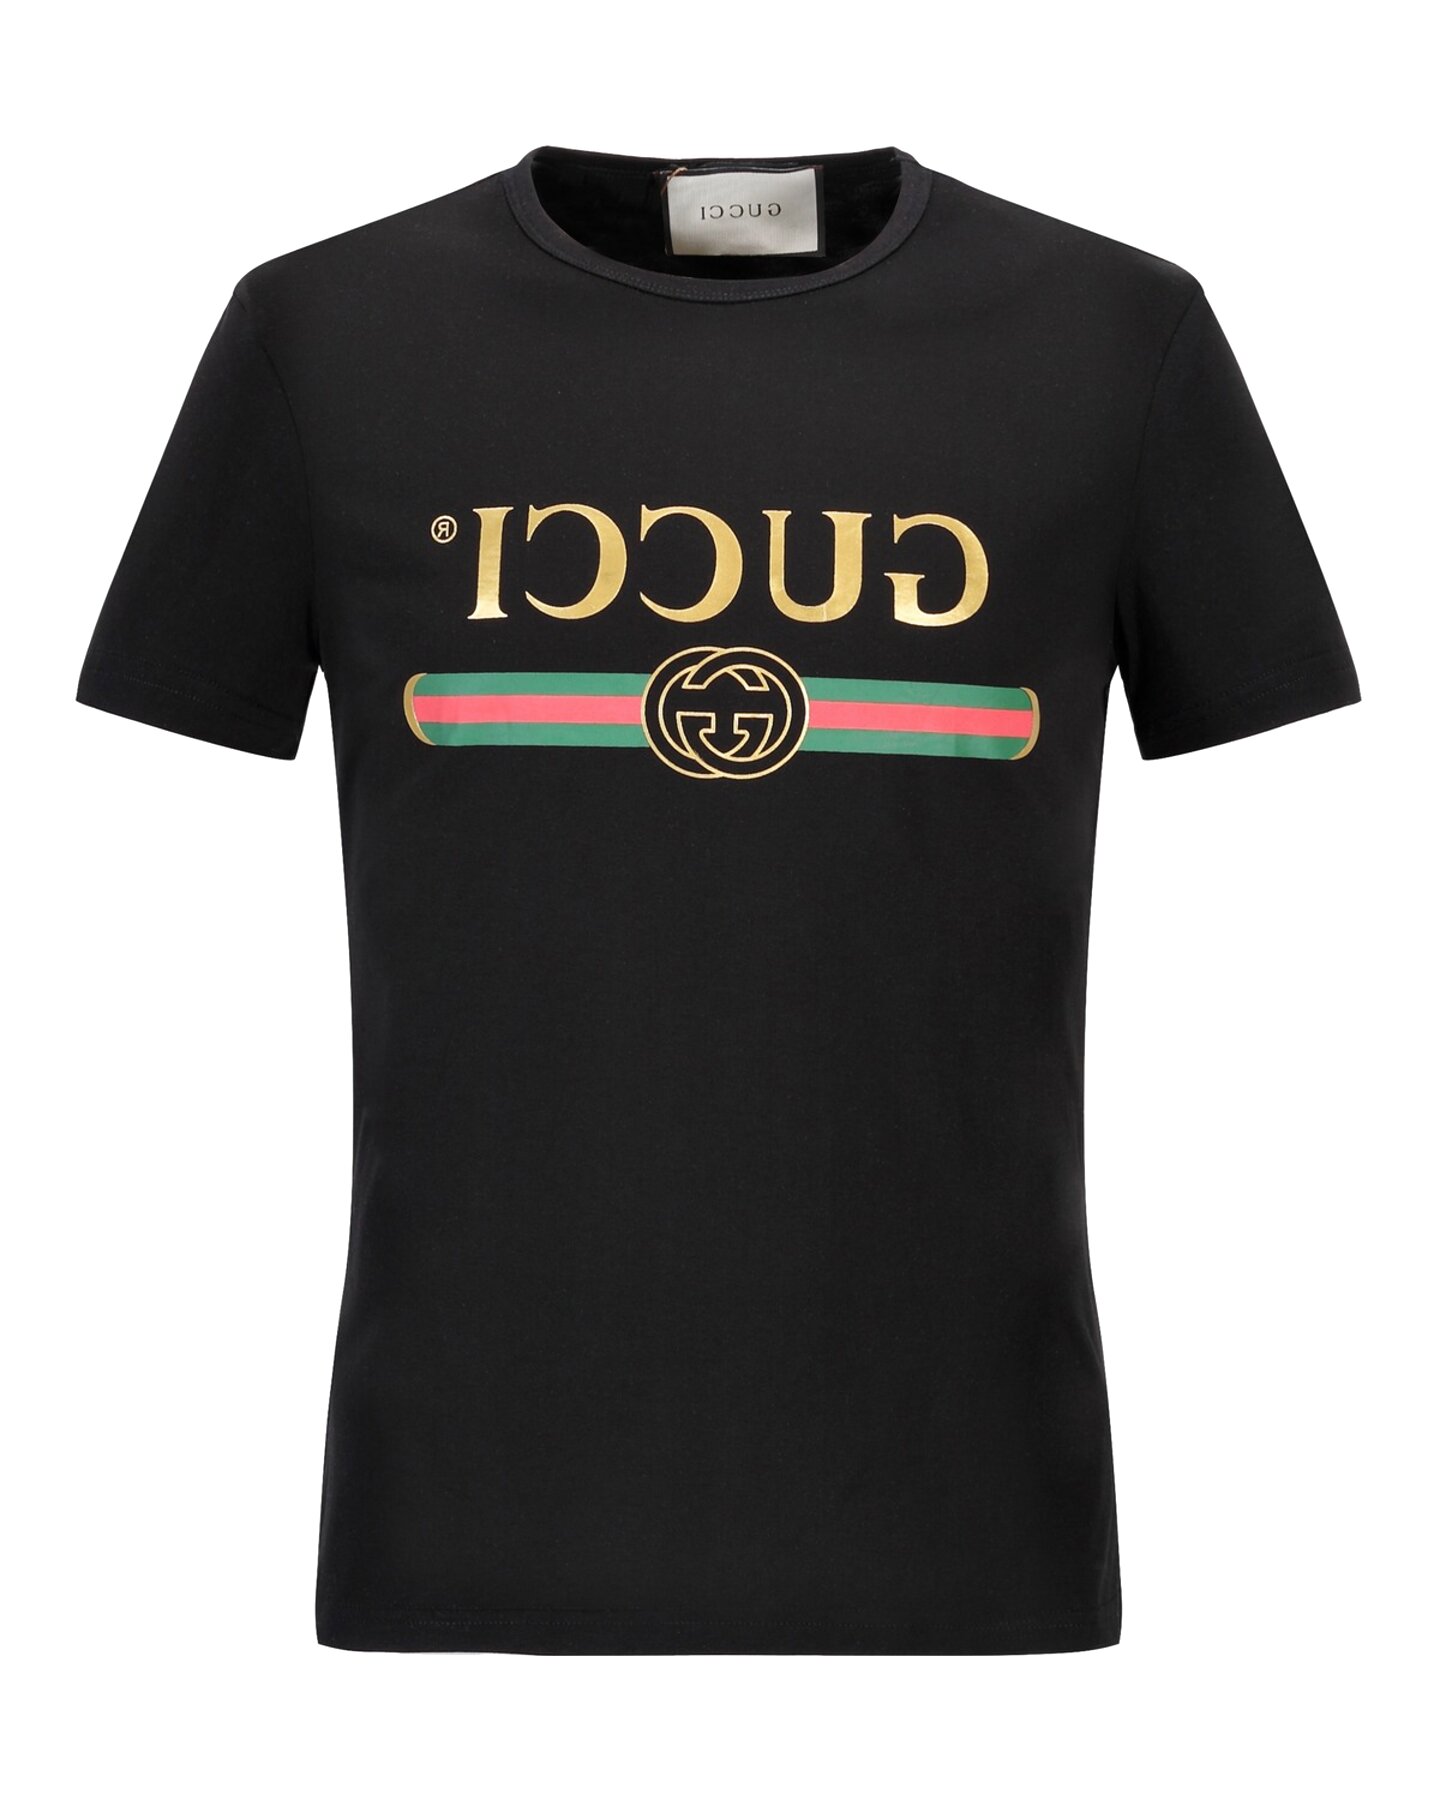 Gucci T Shirt for sale in UK | 89 used Gucci T Shirts